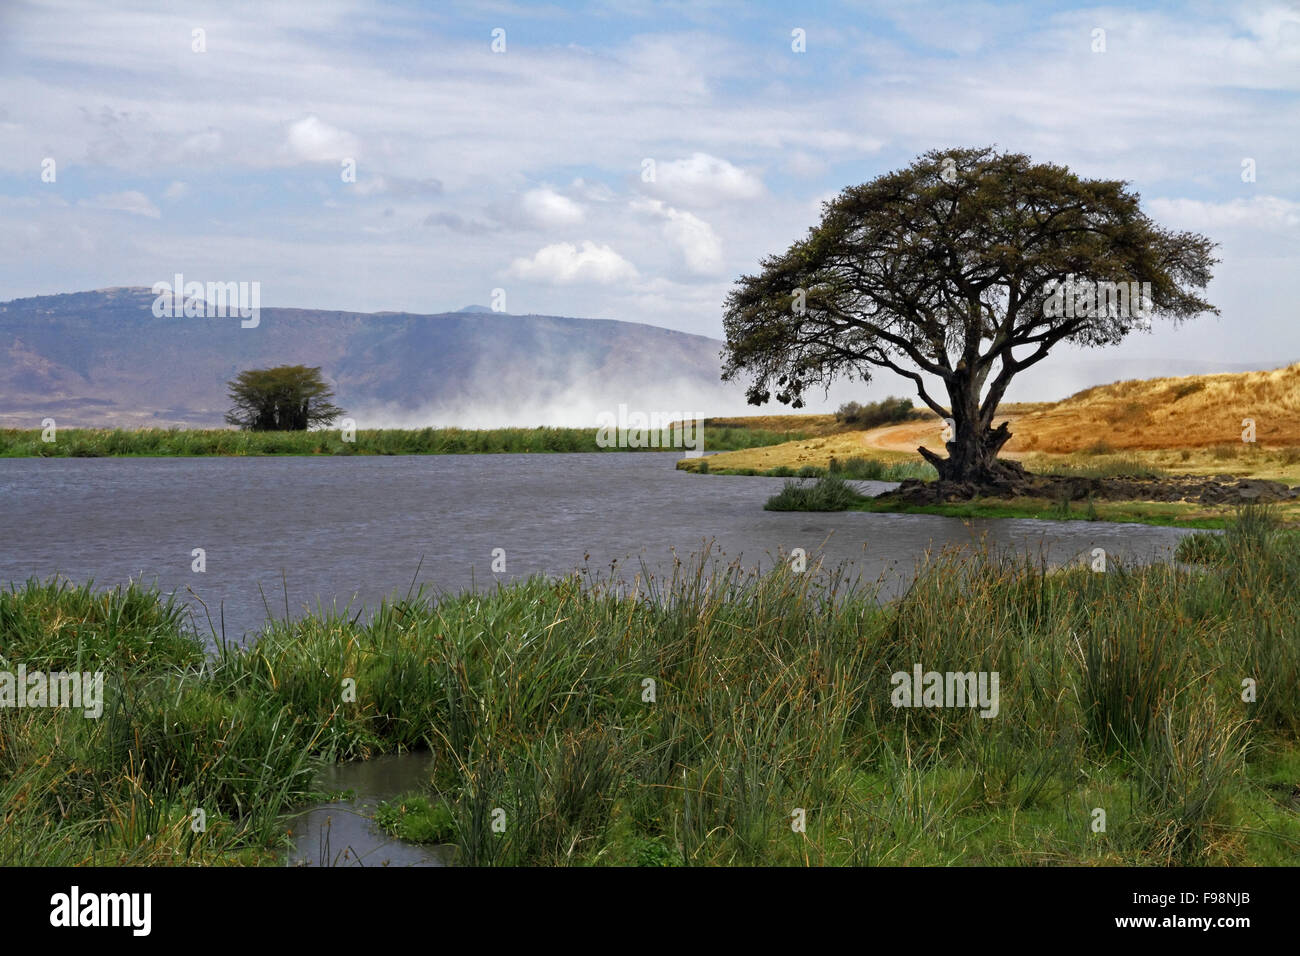 A watering hole in the Ngorongoro crater of Tanzania, Africa. Stock Photo